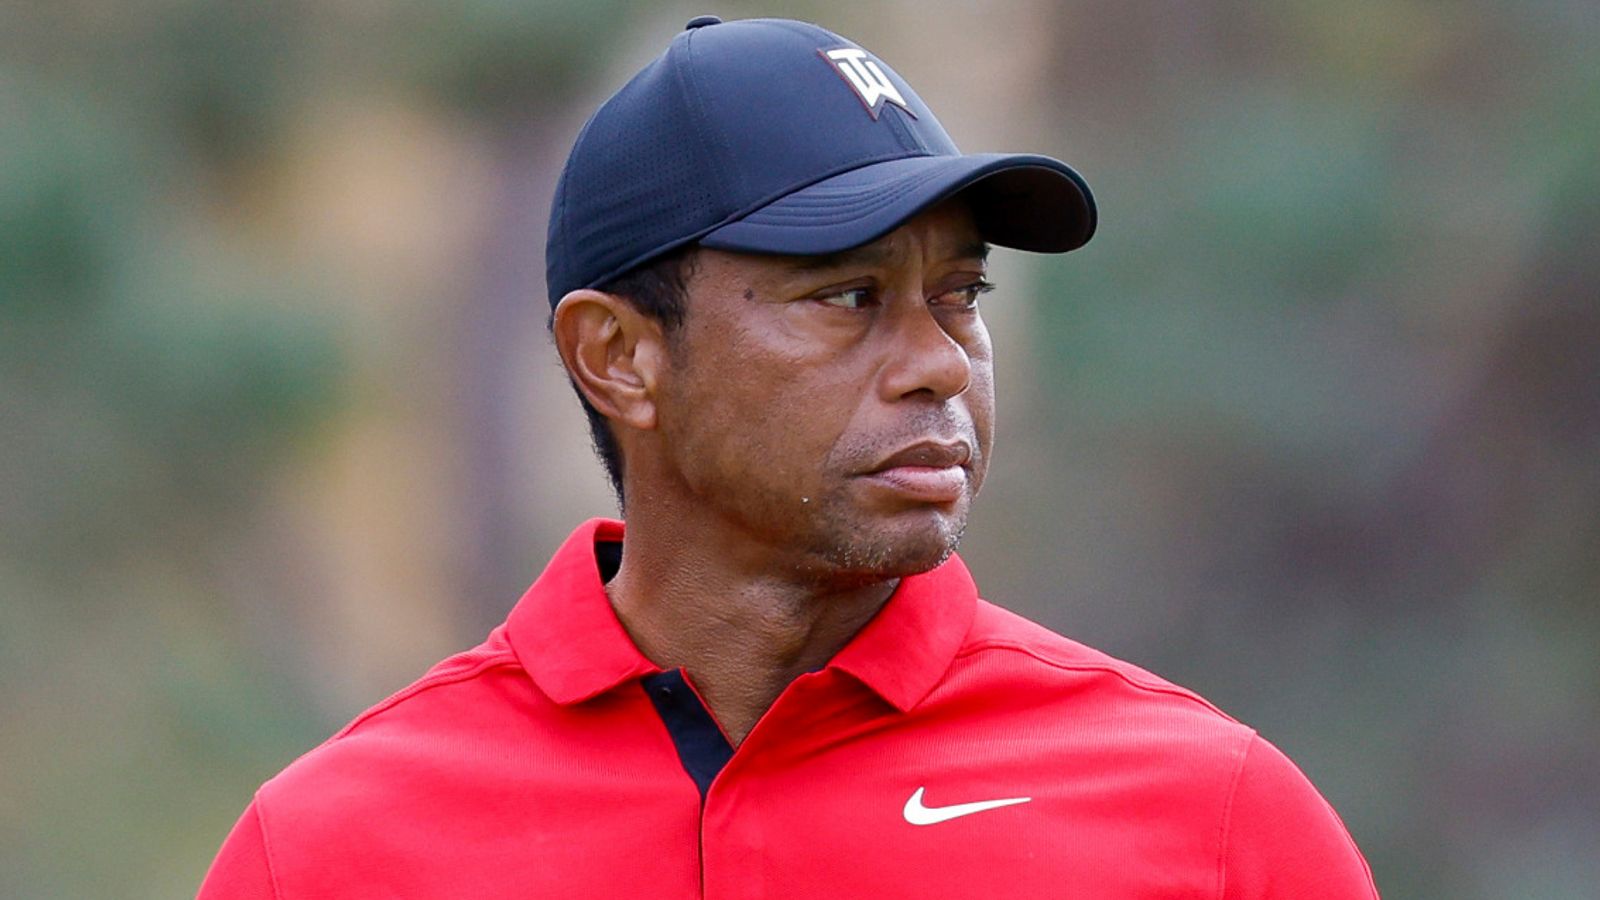 Tiger Woods teases new clothing brand reveal date on social media ahead ...